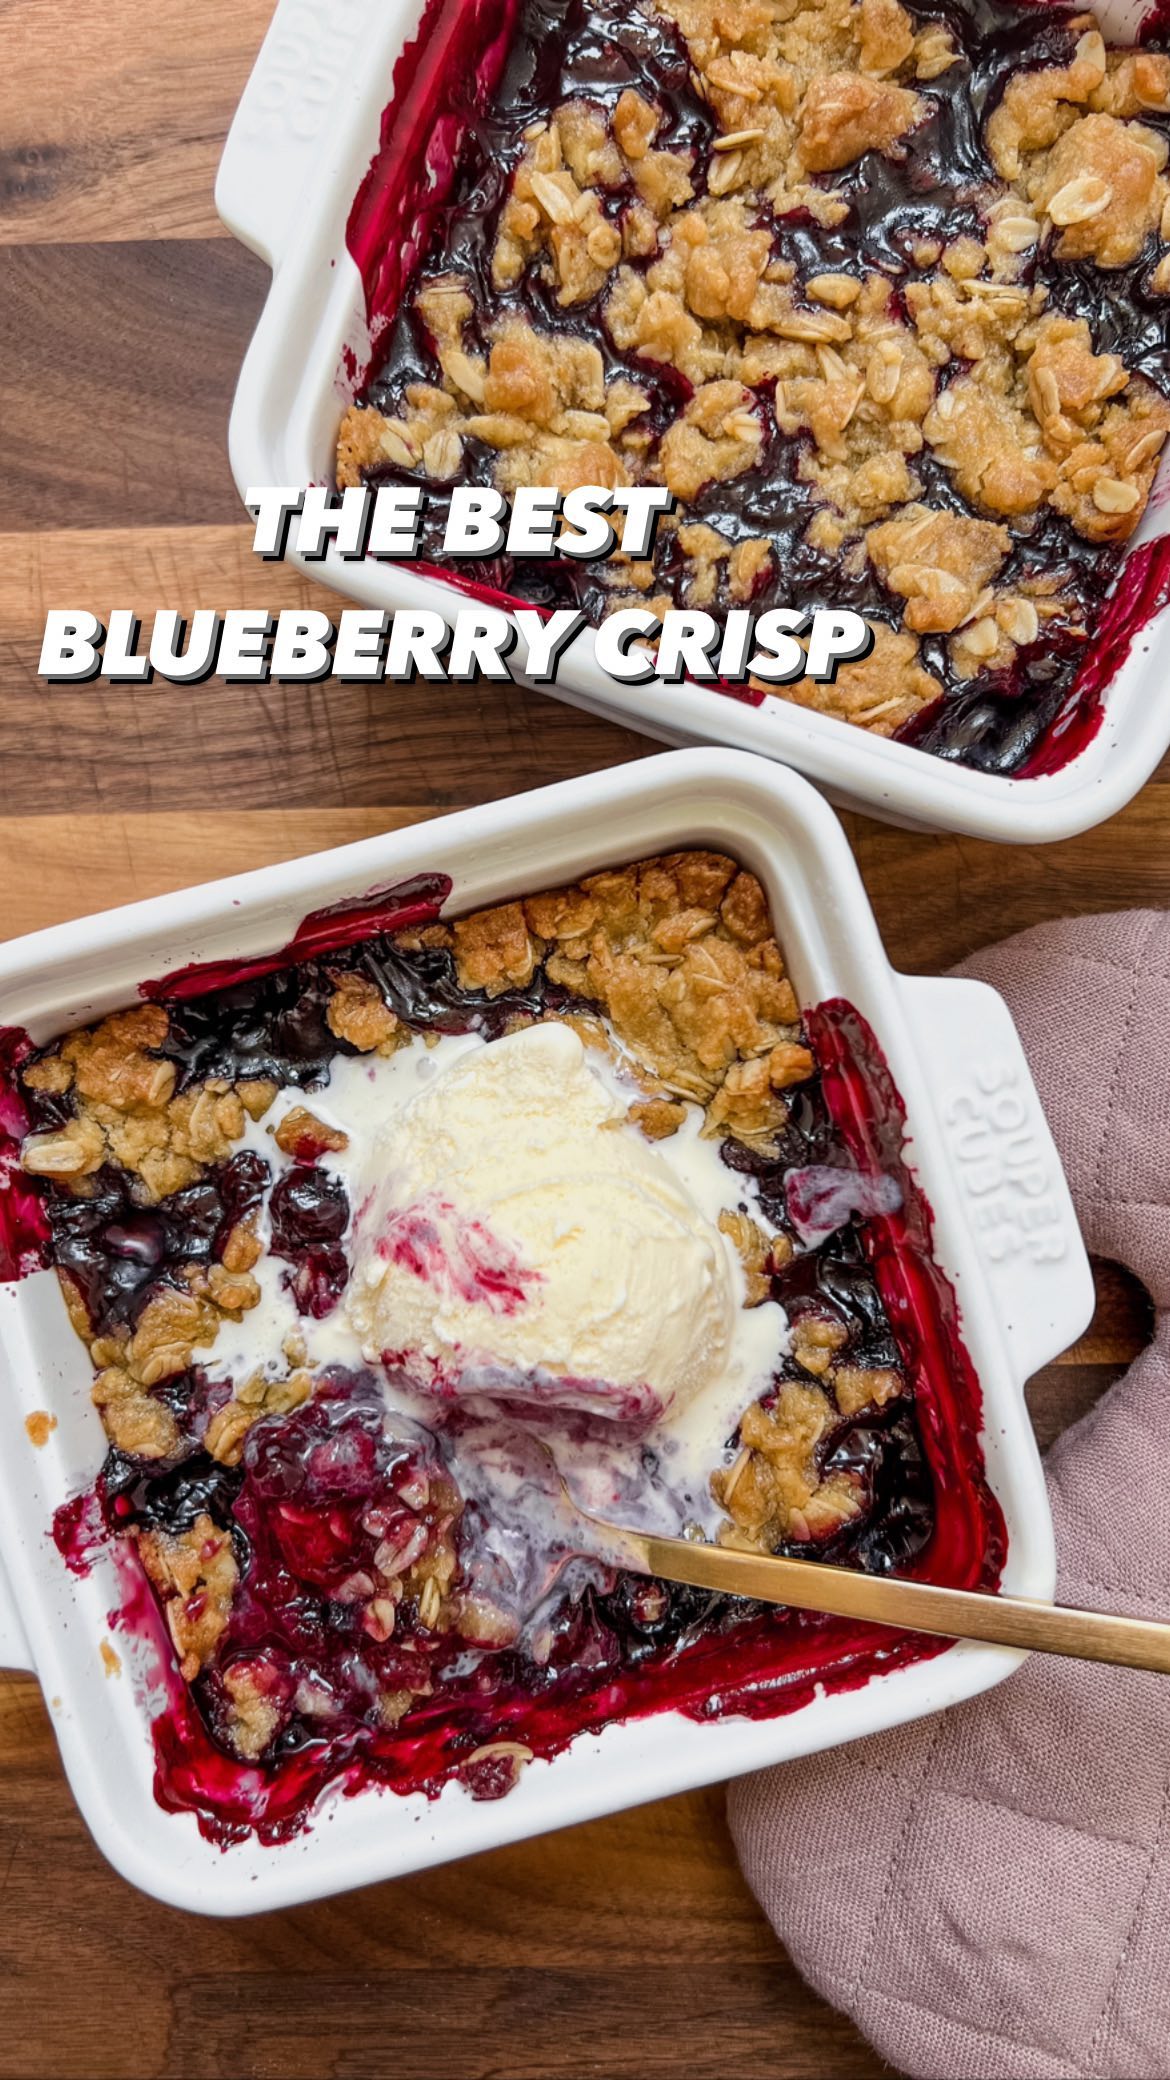 THE BEST BLUEBERRY CRISP🫐 an incredibly easy & delicious summer treat! perfect way to make monday special🙌🏻
.
there’s never enough crisp topping in my opinion whenever i make one, so i did my personal perfect ratio of filling to topping & it’s magical🥰
.
what you need to make it:
-blueberries (or any fruit)
-lemon + zest
-cornstarch
-granulated sugar 
-unsalted butter
-brown sugar
-vanilla extract
-all-purpose flour
-sea salt
.
the full recipe is on our blog & linked in our bio/ stories🥰
.
https://daddioskitchen.com/2022/07/25/the-best-blueberry-crisp/